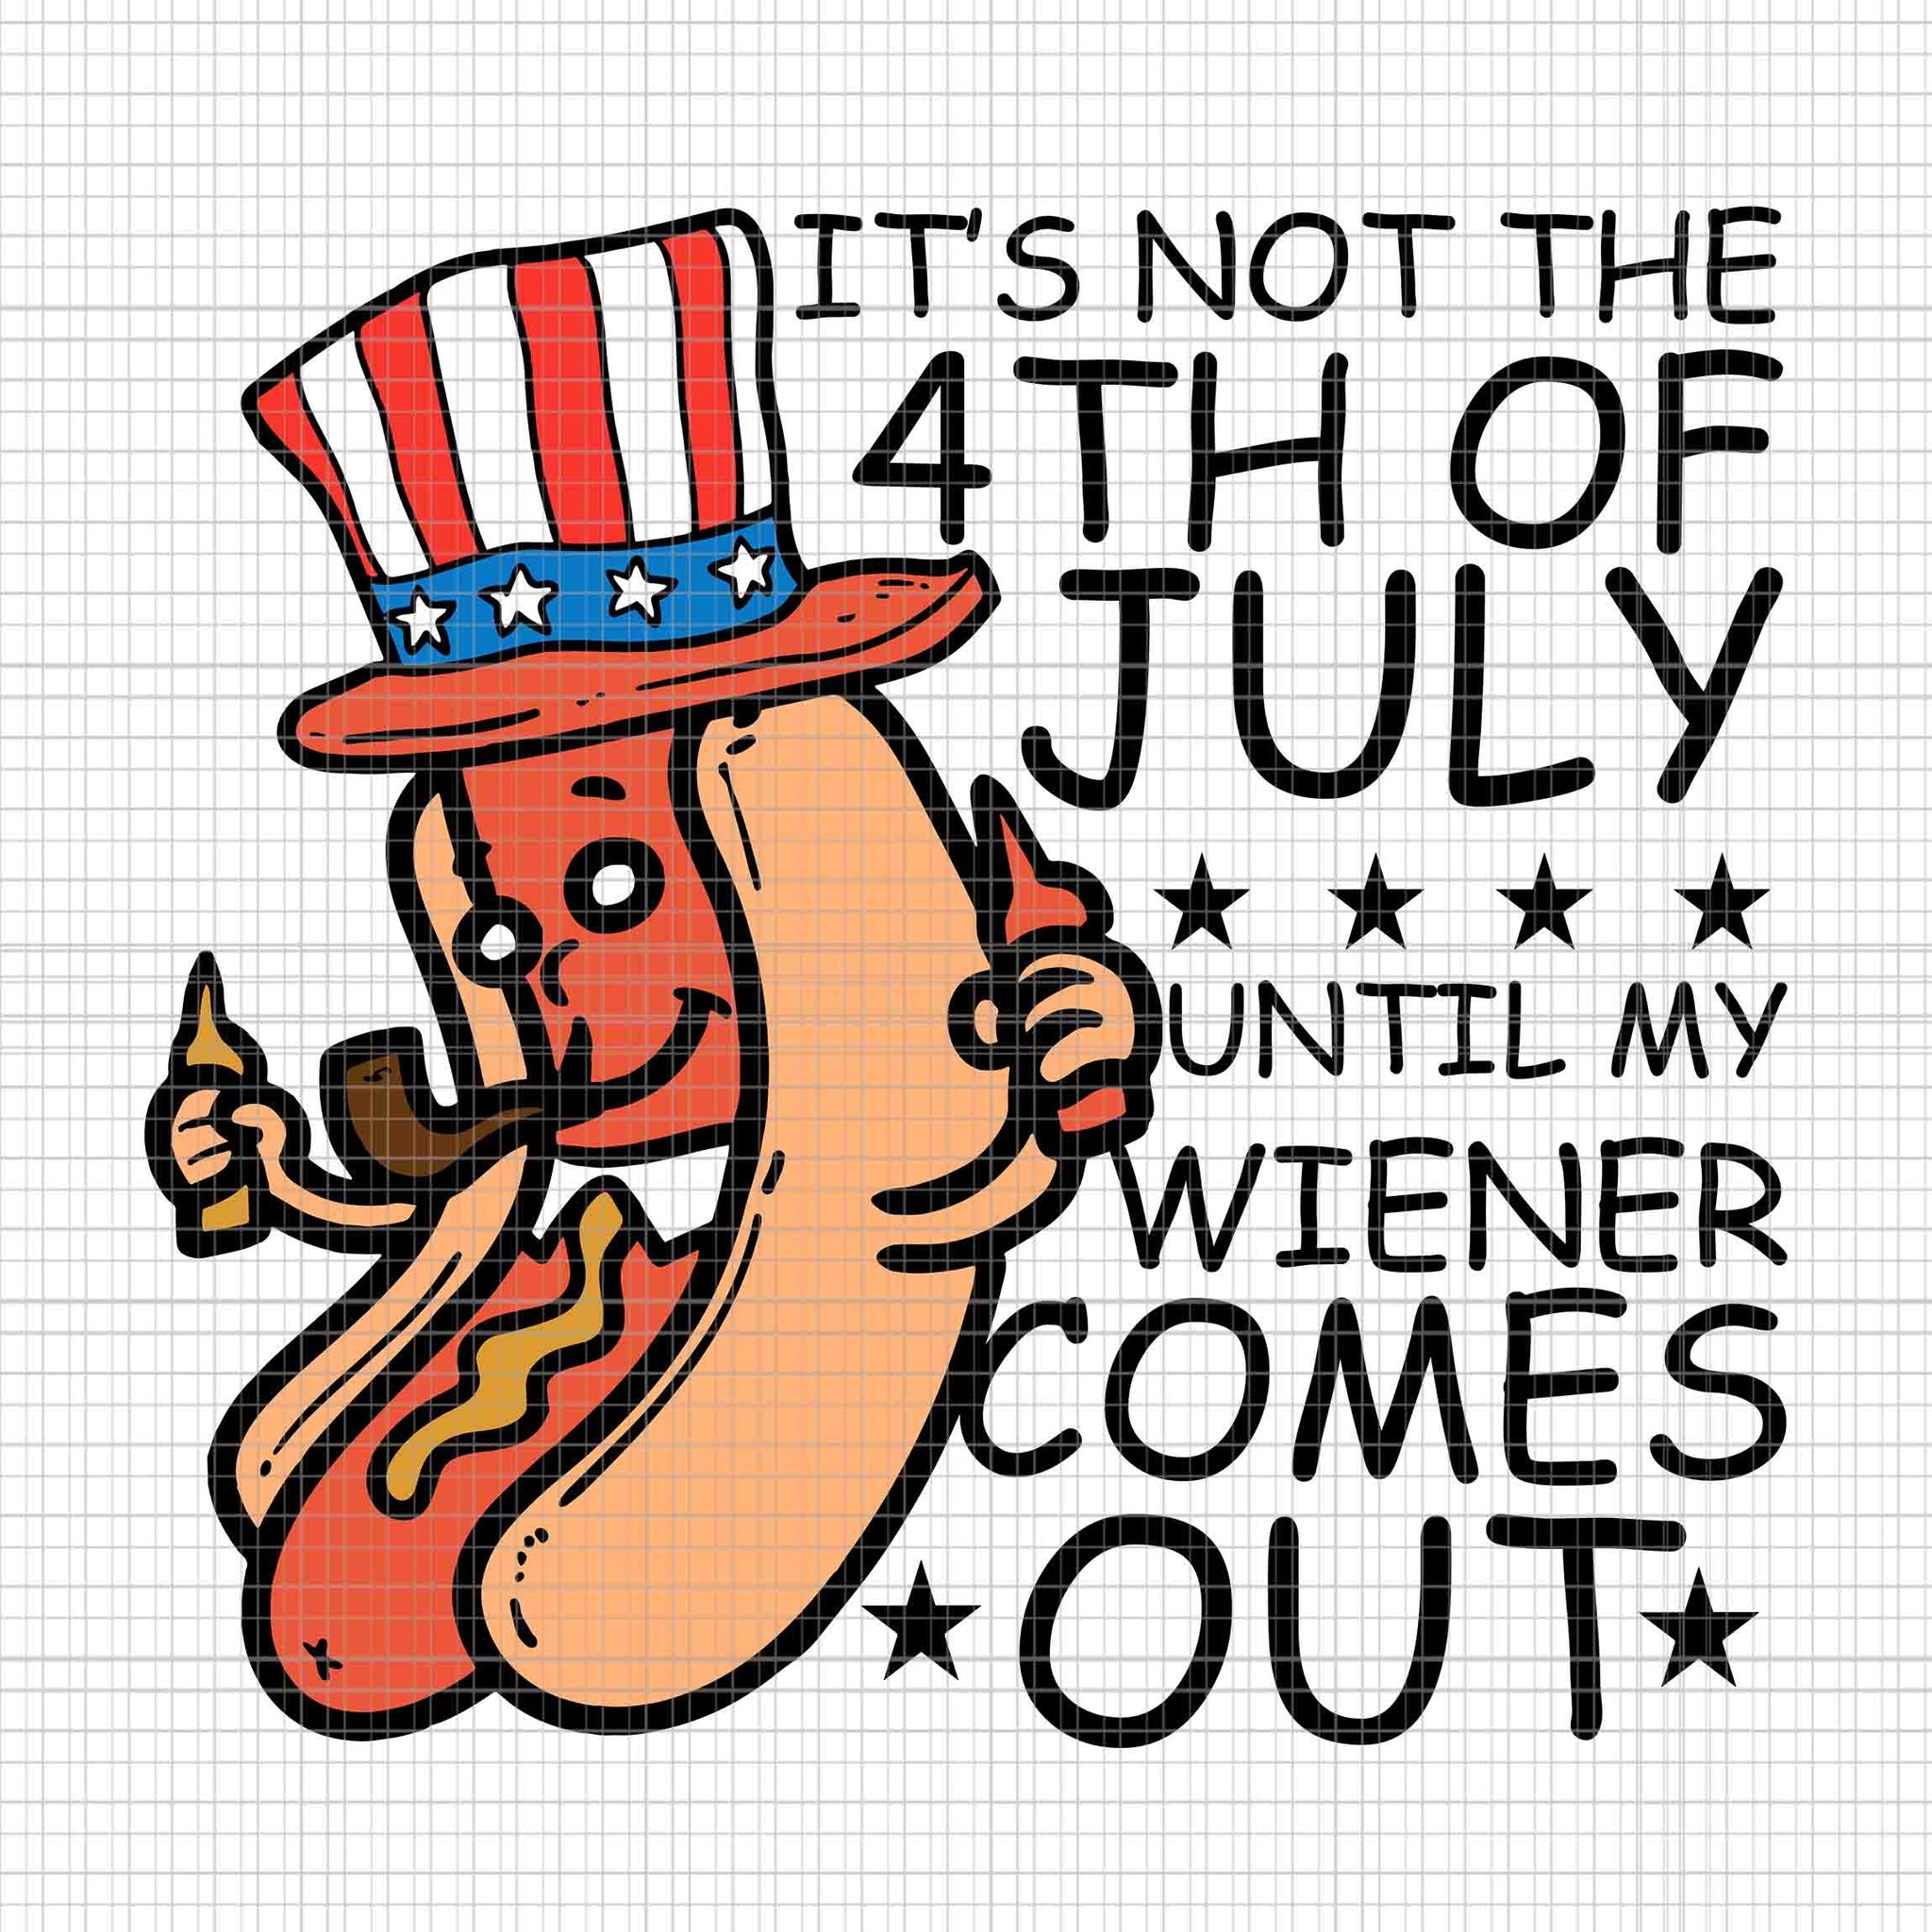 It's Not The 4th Of July Until My Wiener Come Out Svg, Funny Hotdog Svg, Hotdog 4th Of July Svg, 4th Of July Svg